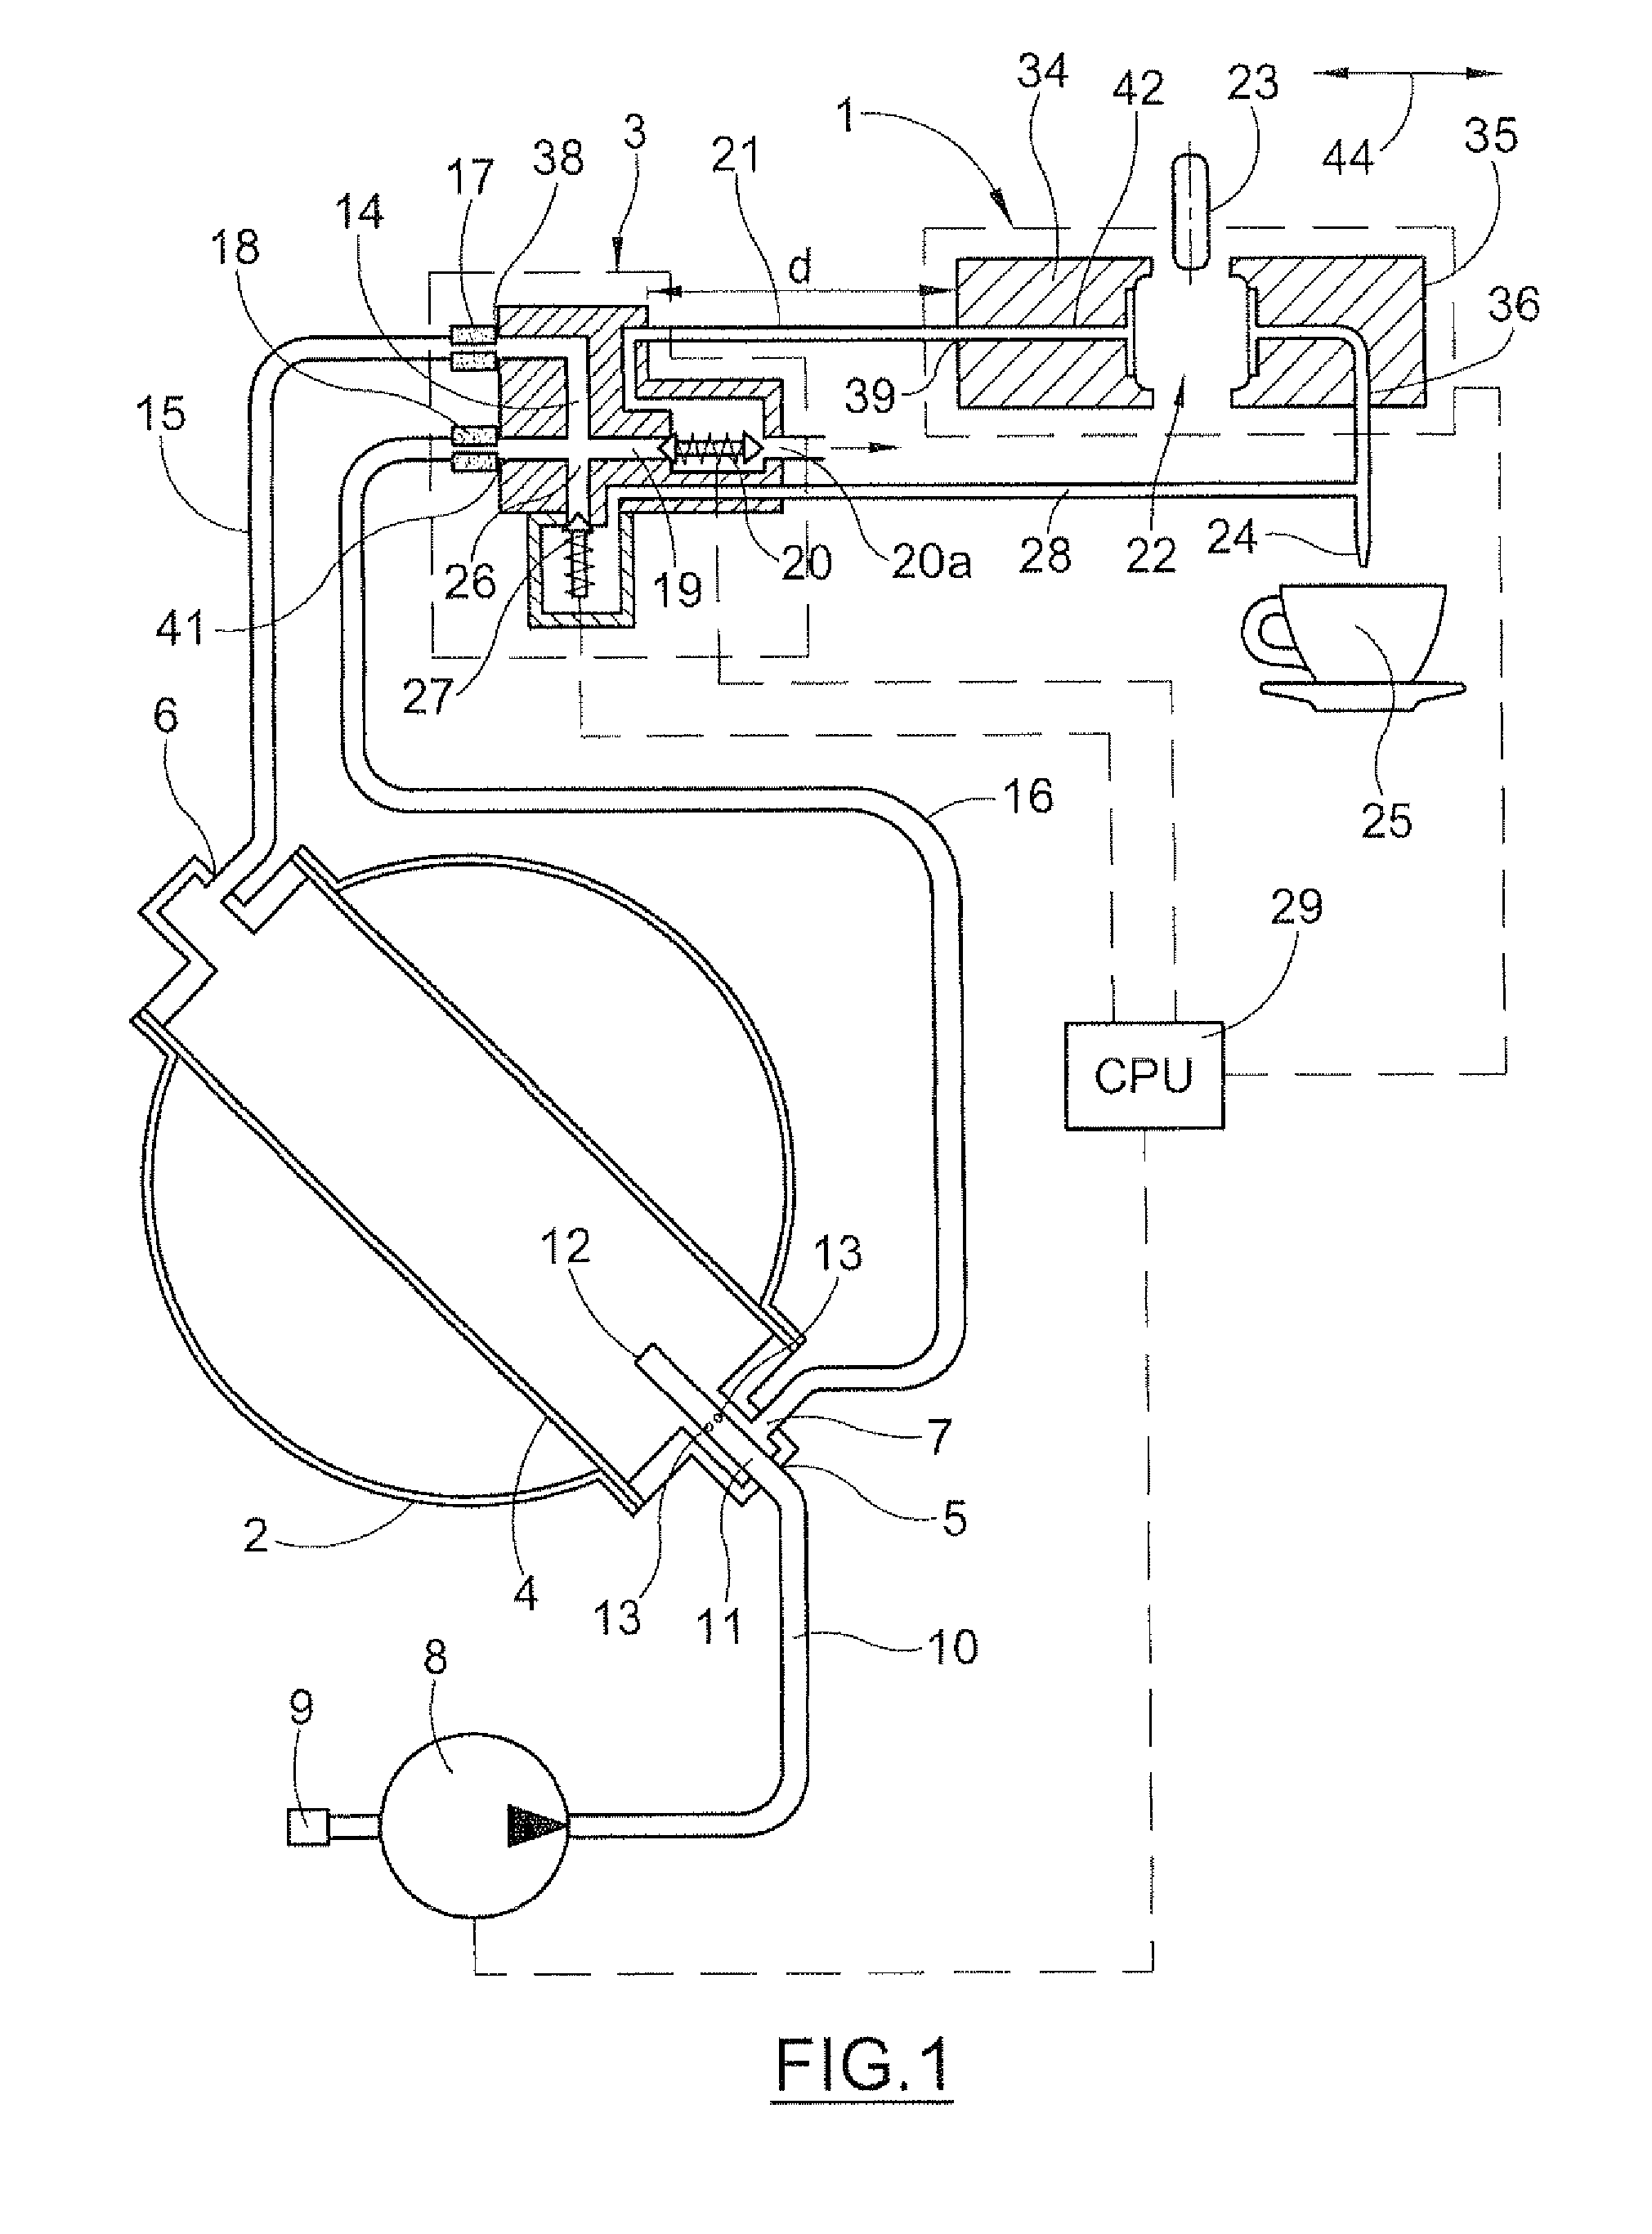 Apparatus for the preparation of coffee-based beverages from pre-packaged pods or capsules